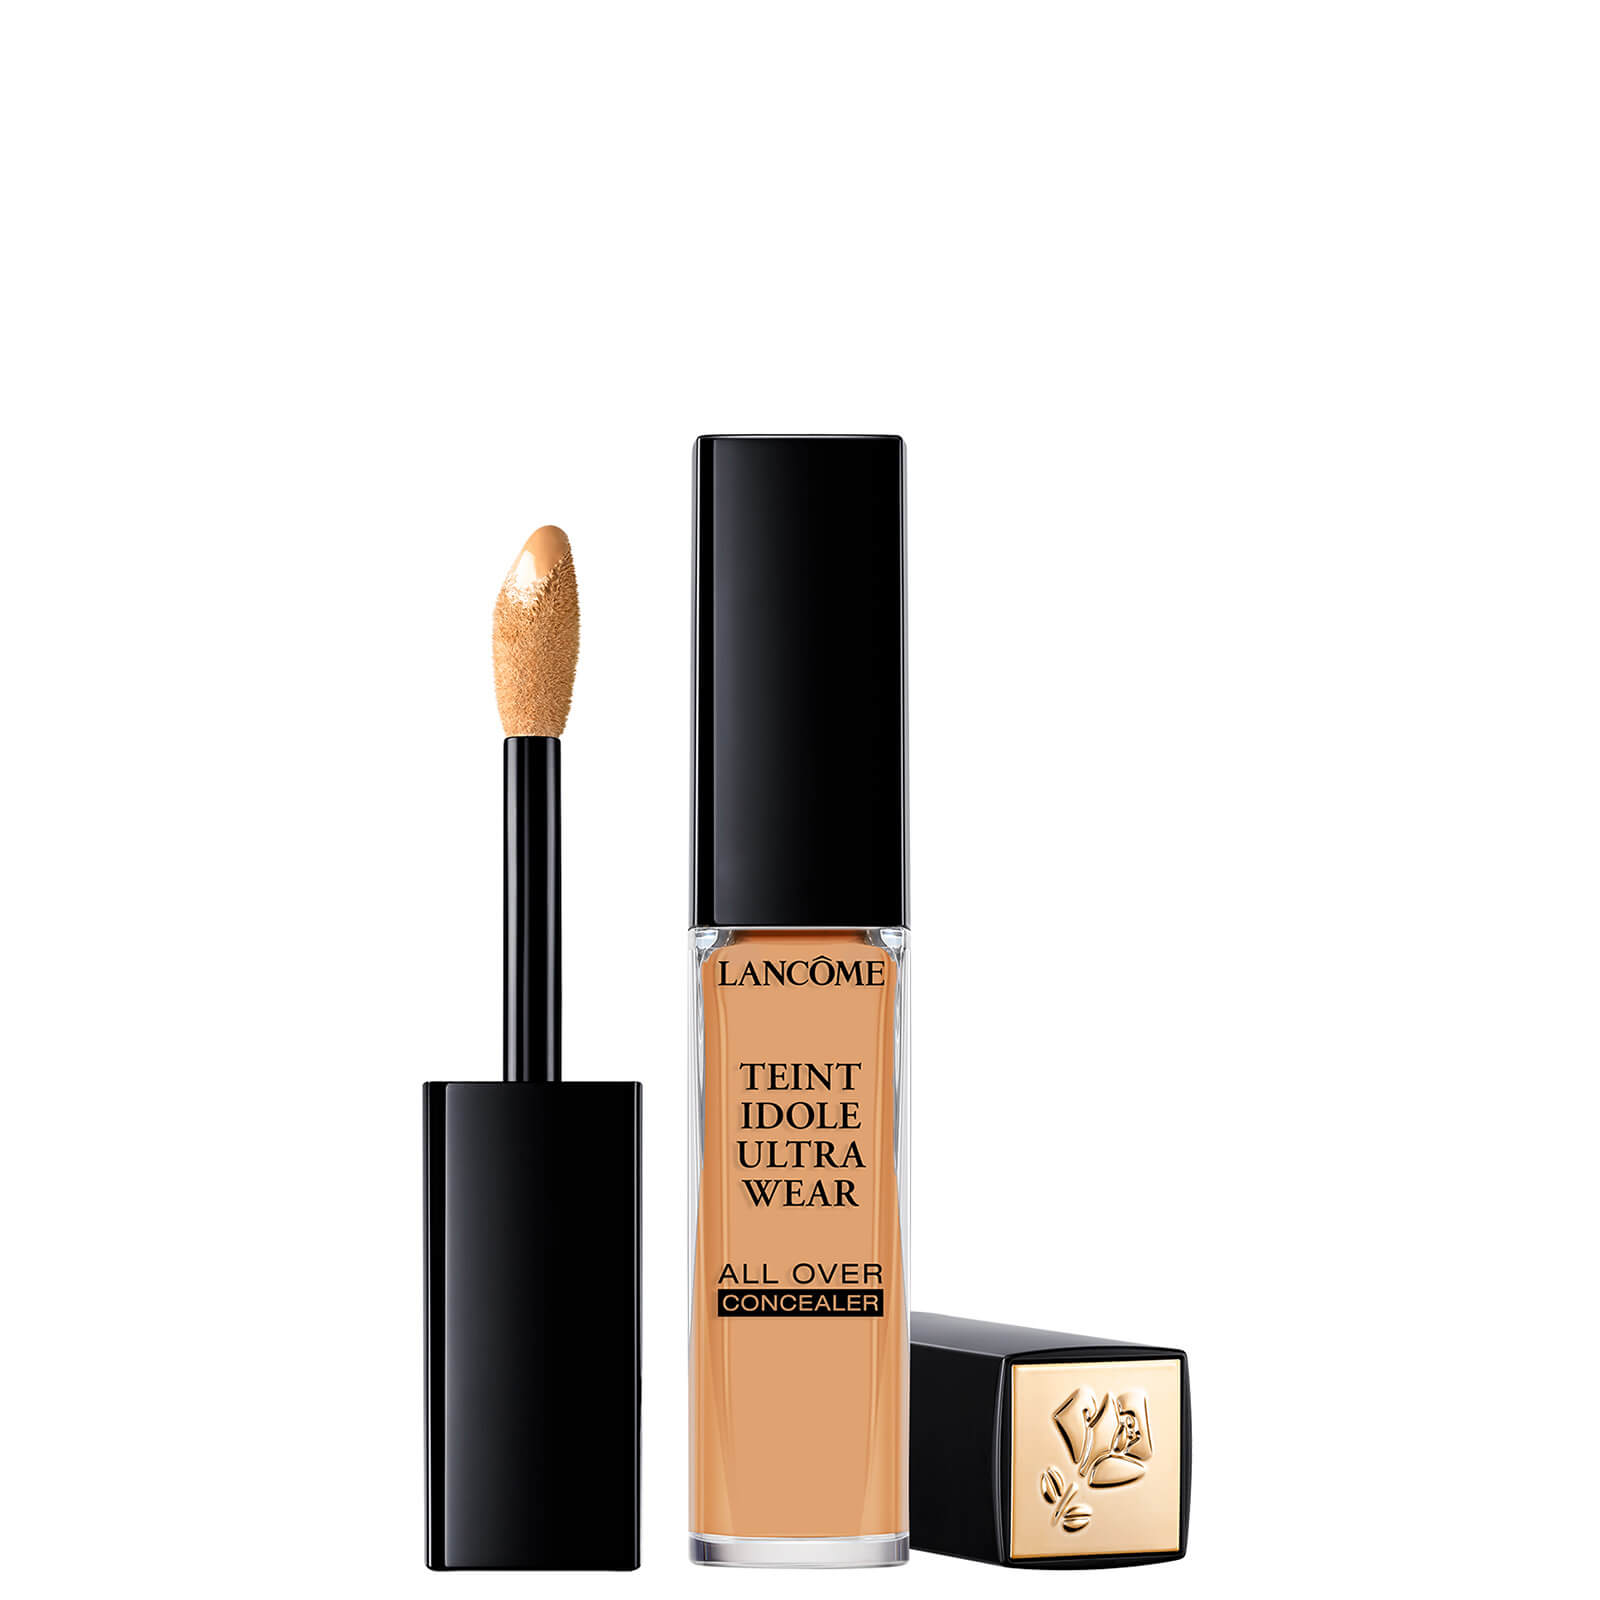 Lancome Teint Idole Ultra Wear All Over Concealer 13ml (Various Shades) - 410 Bisque W 050